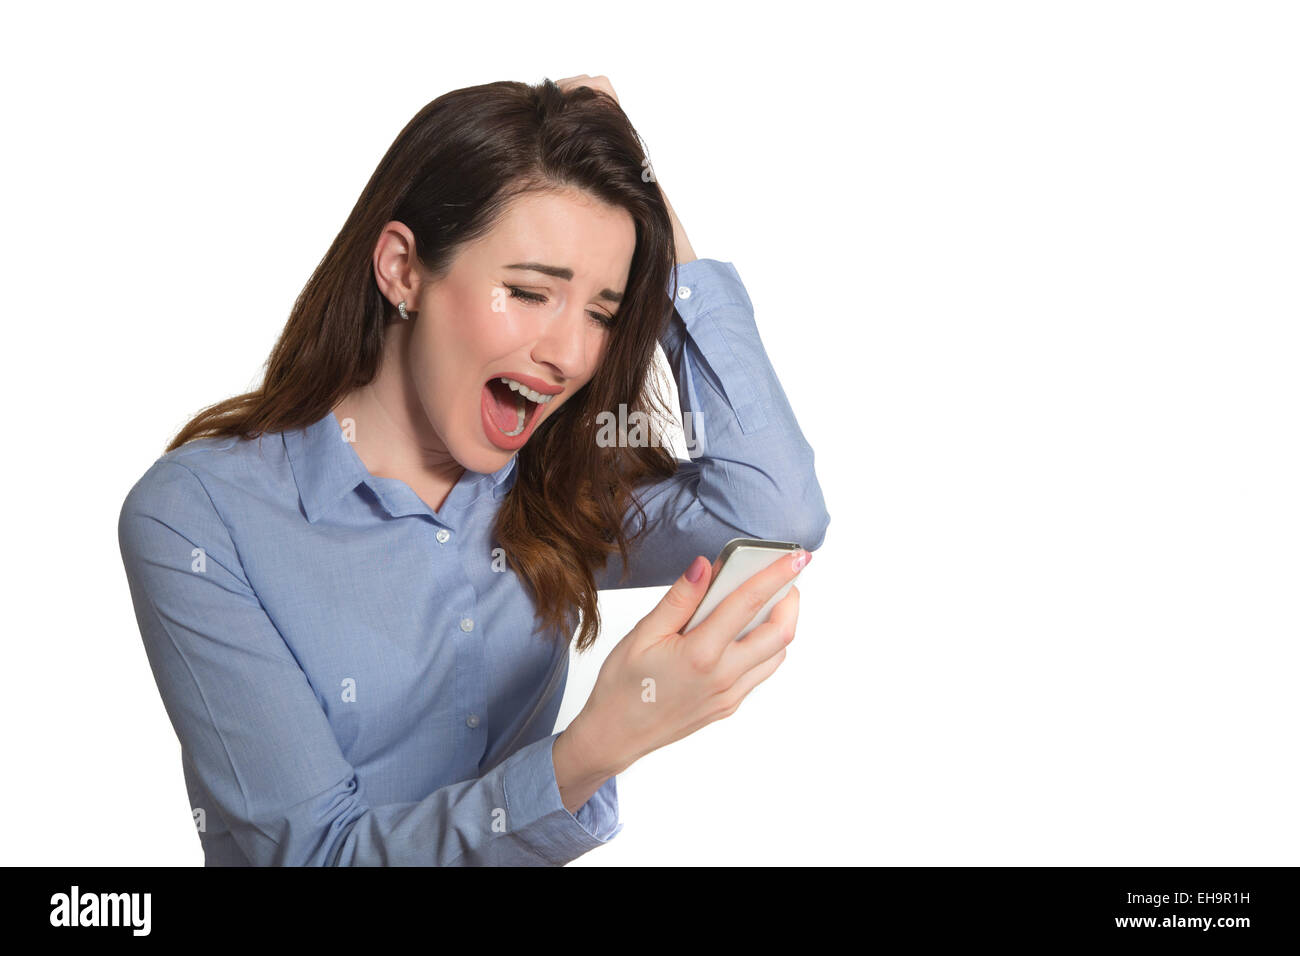 Screaming lady reading text on mobile phone touching her head in despair isolated on white background Stock Photo